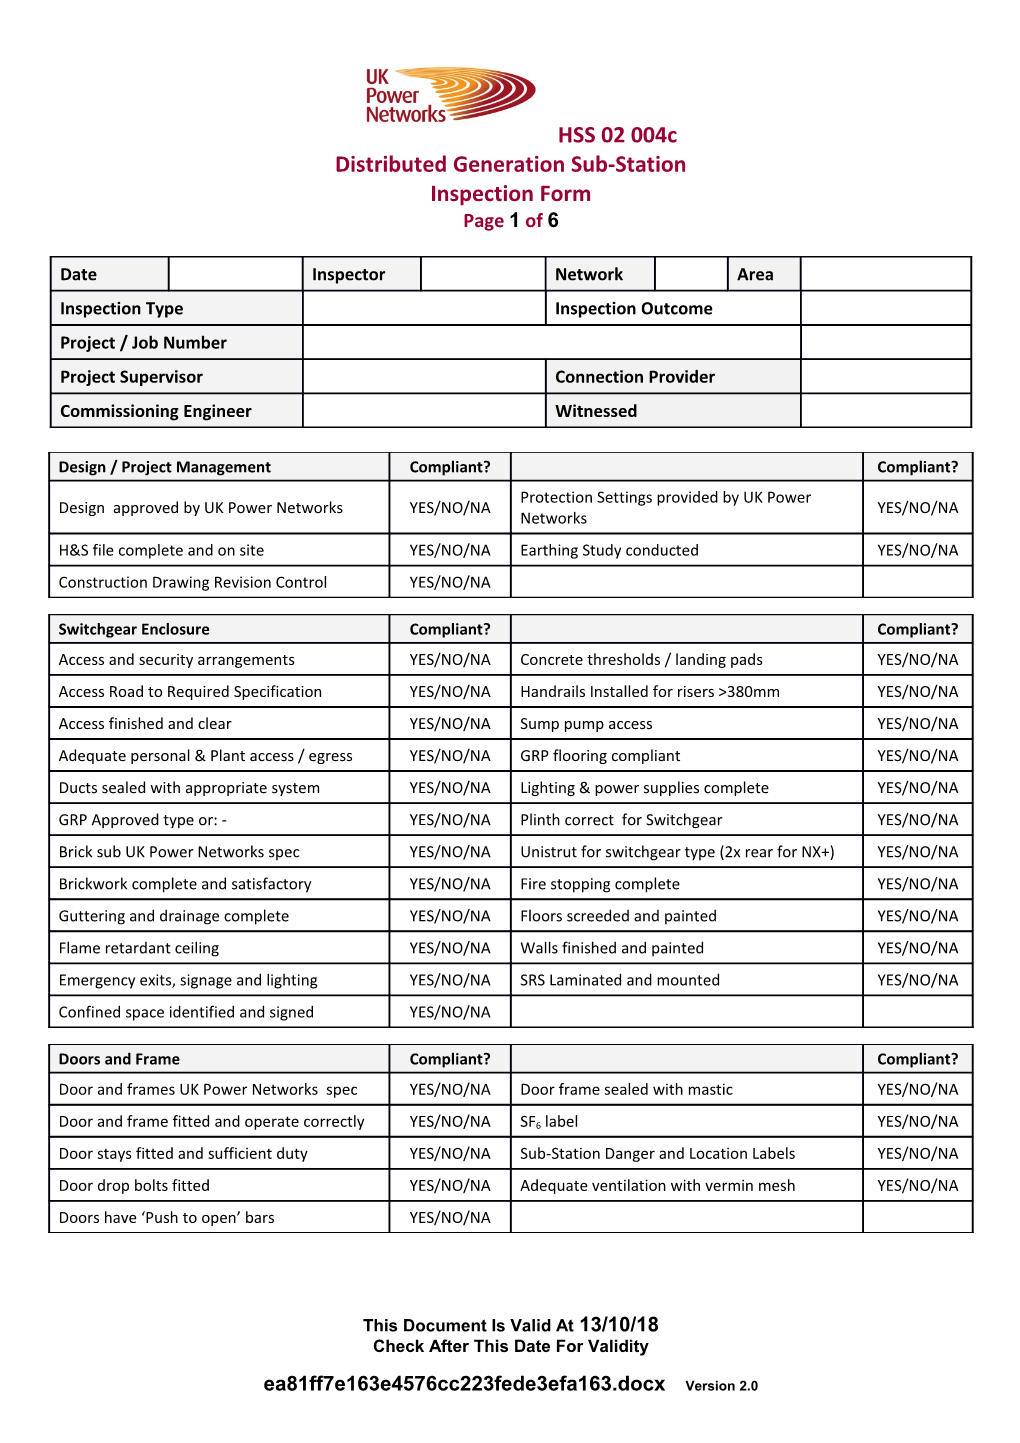 HSS 02 004C Distributed Generation Sub-Station Inspection Form